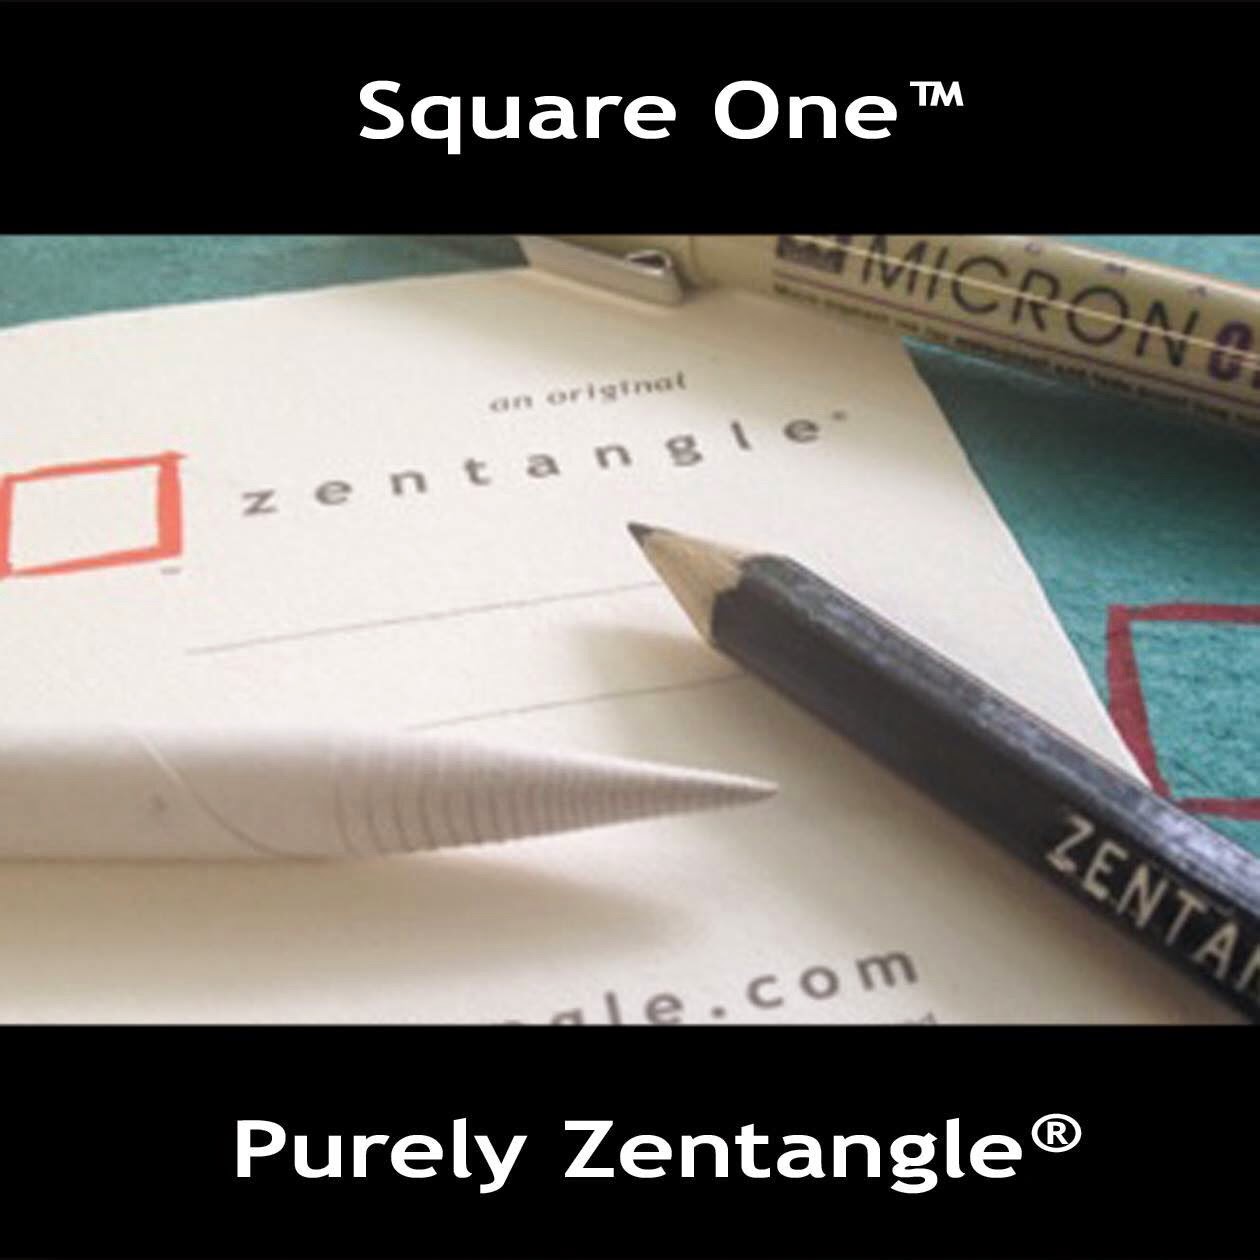 Square One: Purely Zentangle